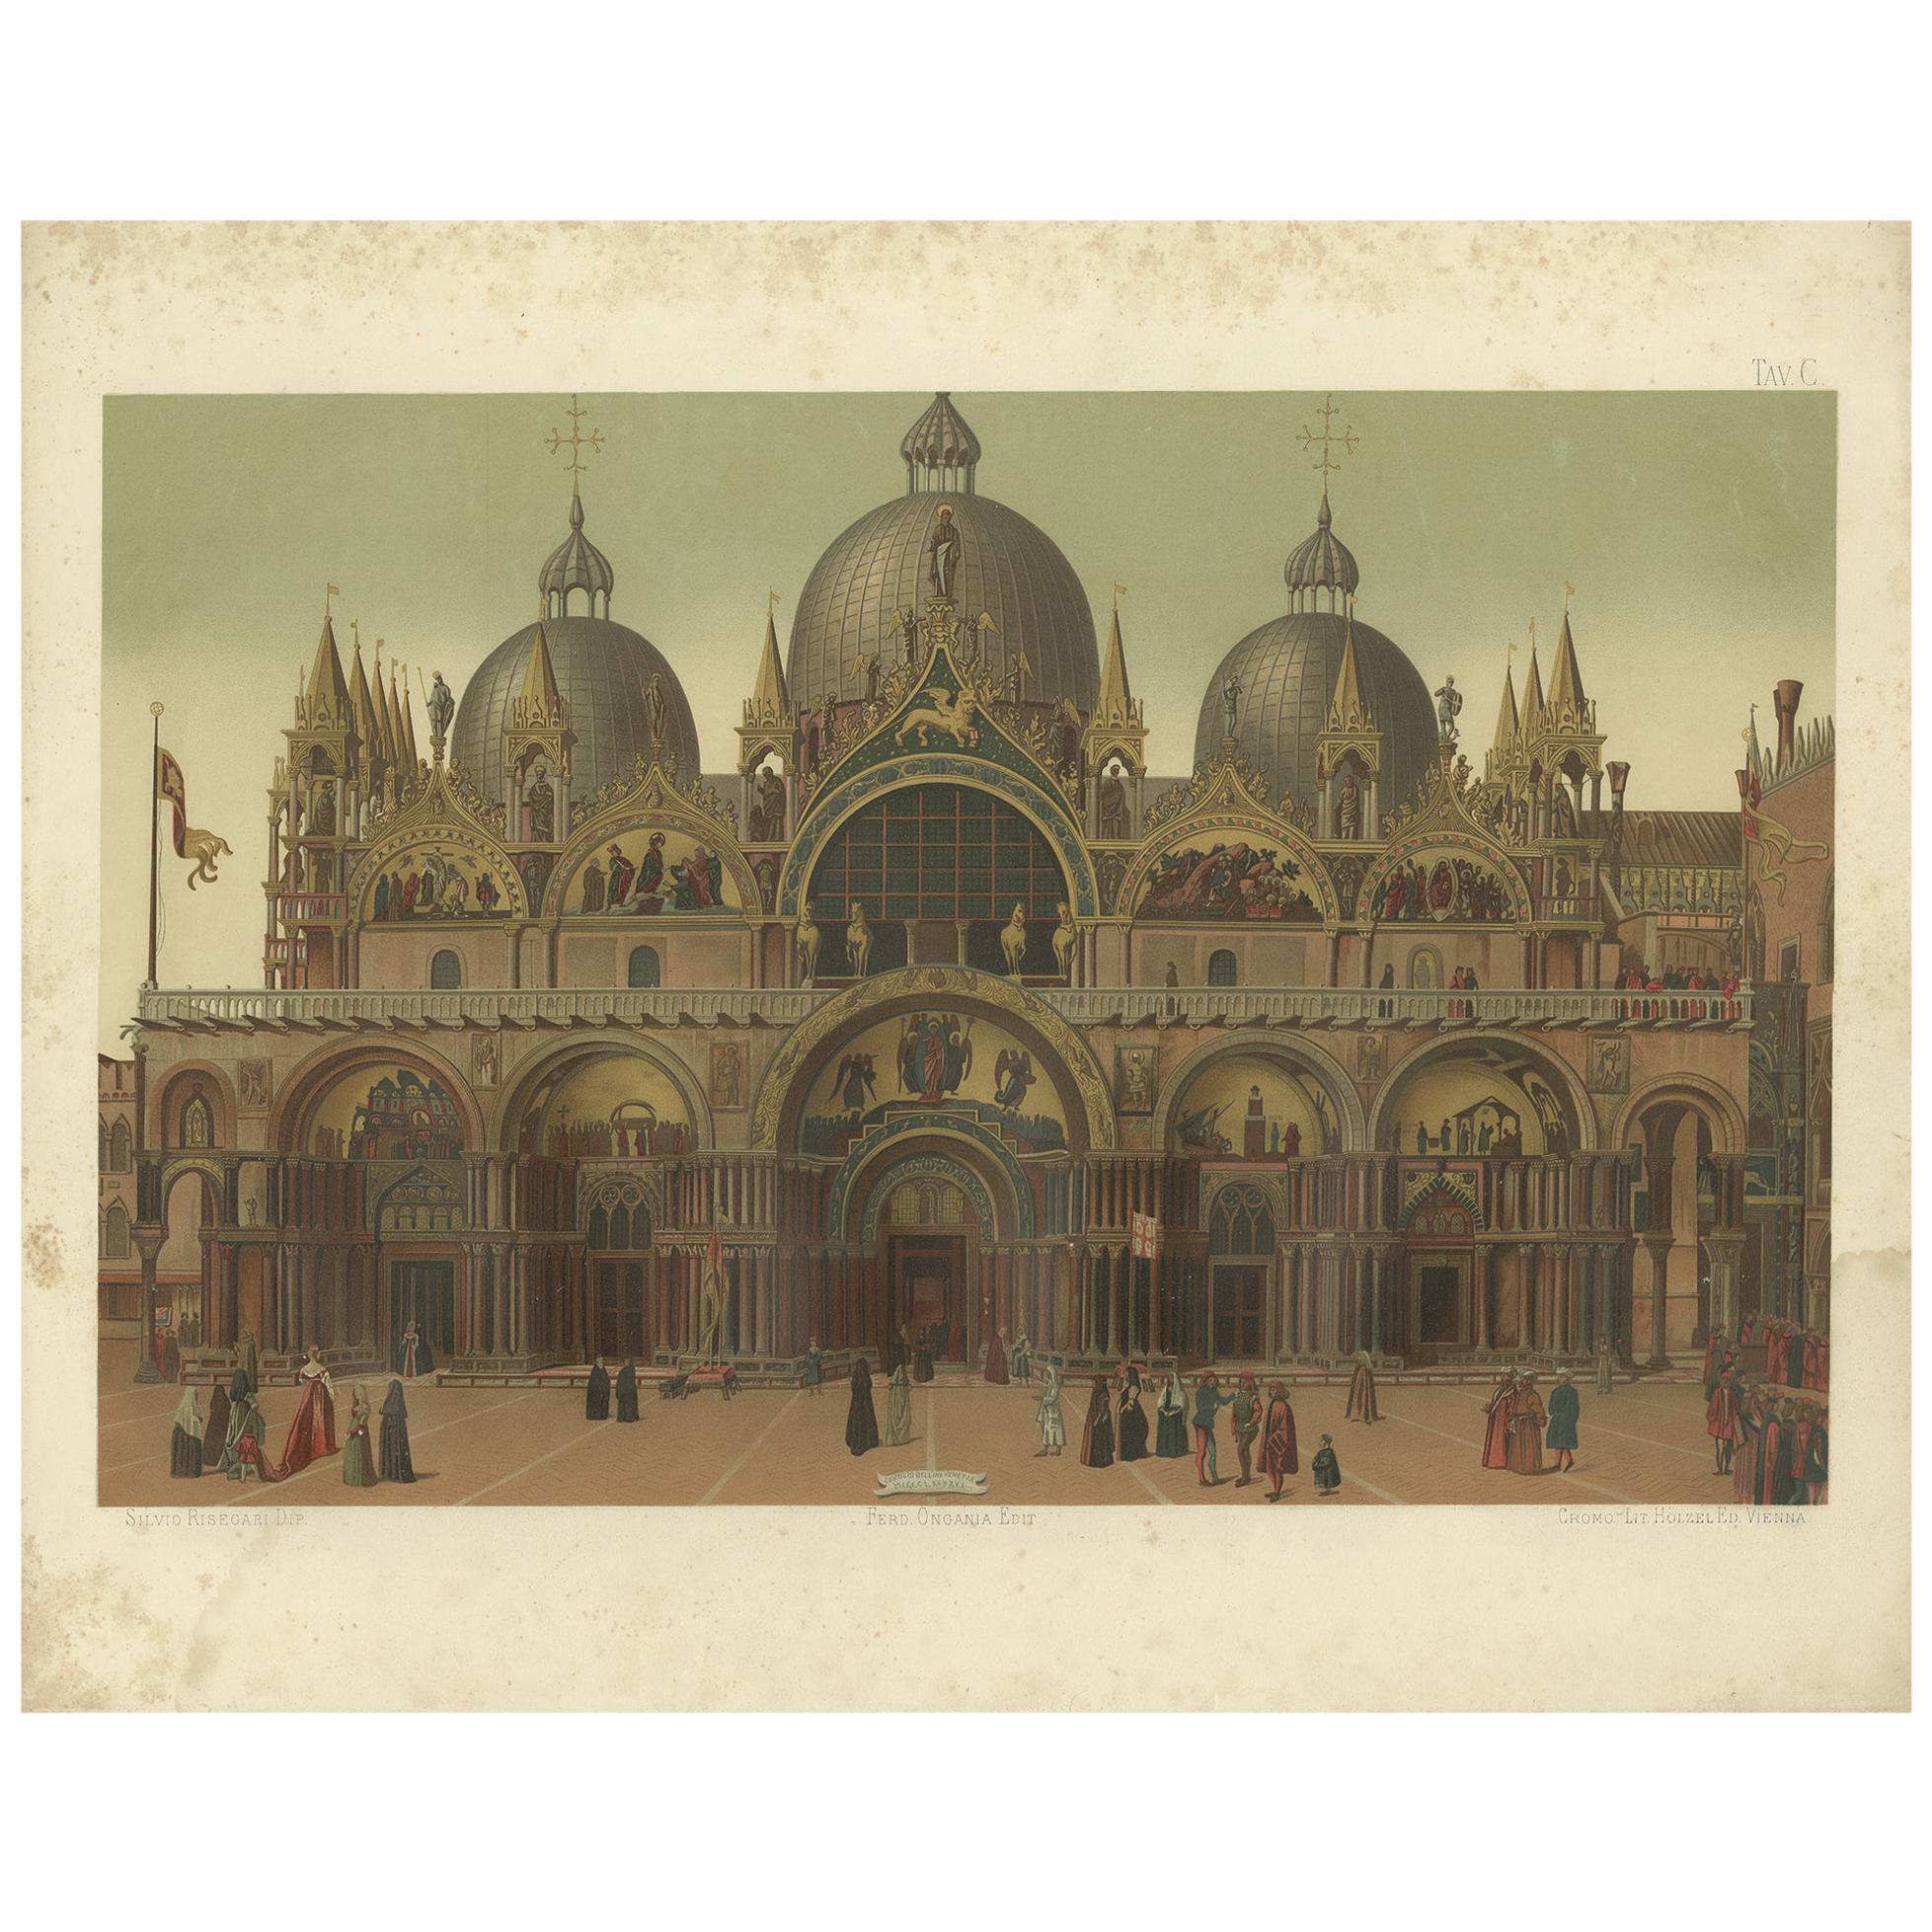 A large chromolithograph of the main facade of the Basilica of San Marco in Venice, Italy, from Ferdinando Ongania's 